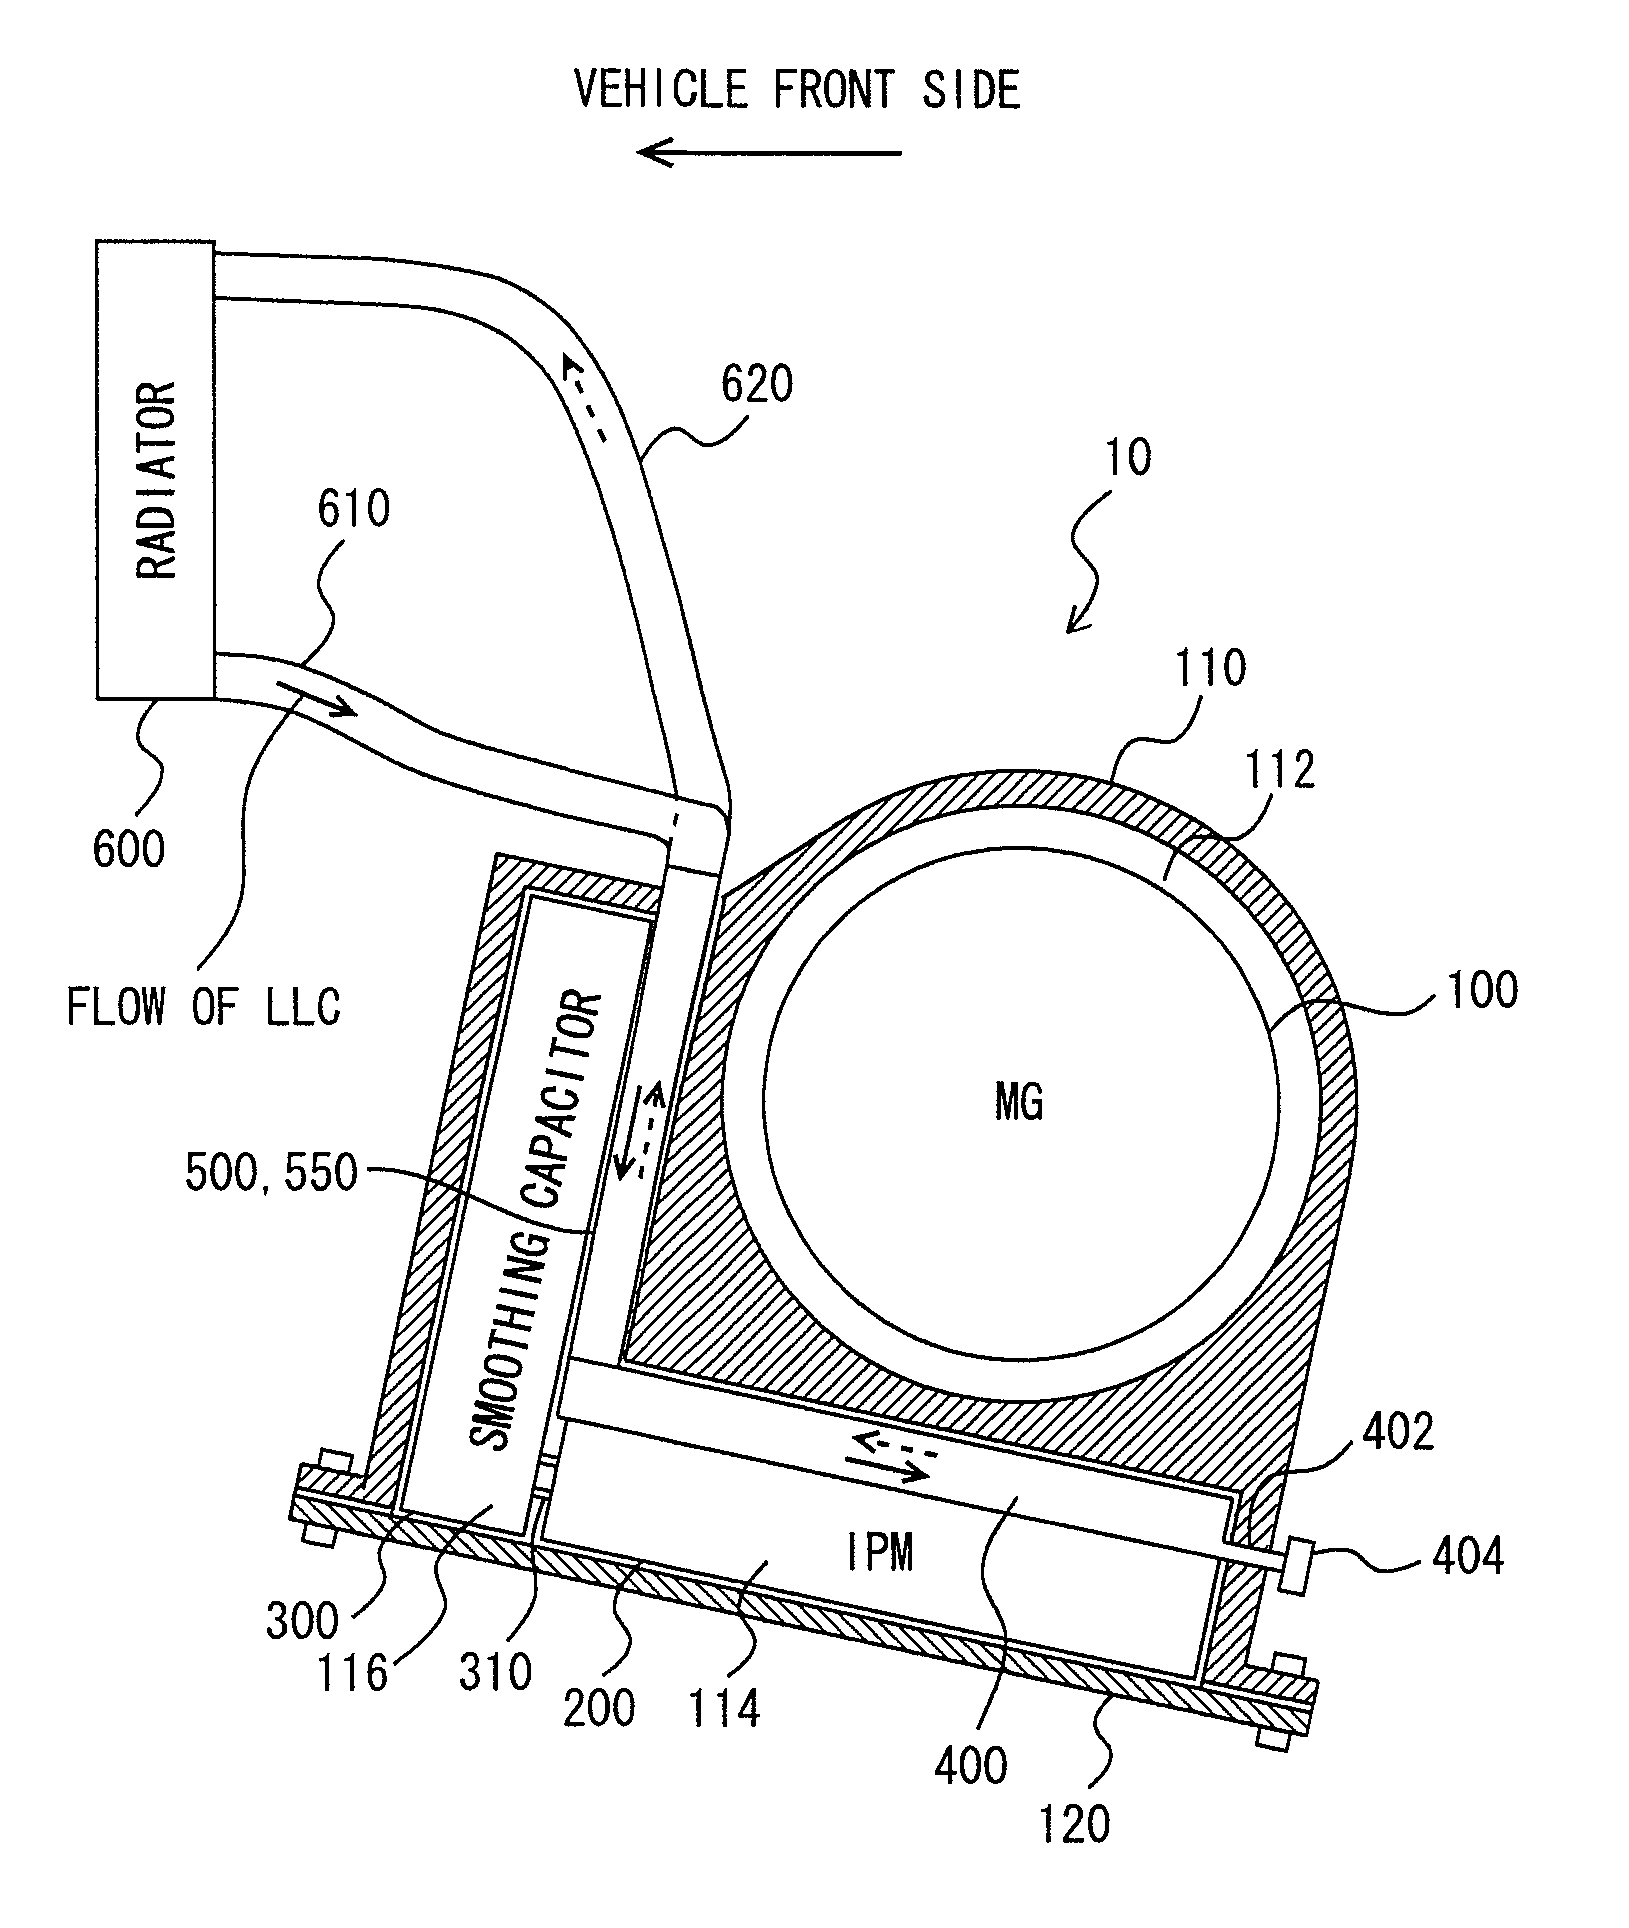 Cooling structure for inverter and capacitor accommodated integrally with motor in housing of motor, motor unit with cooling structure, and housing